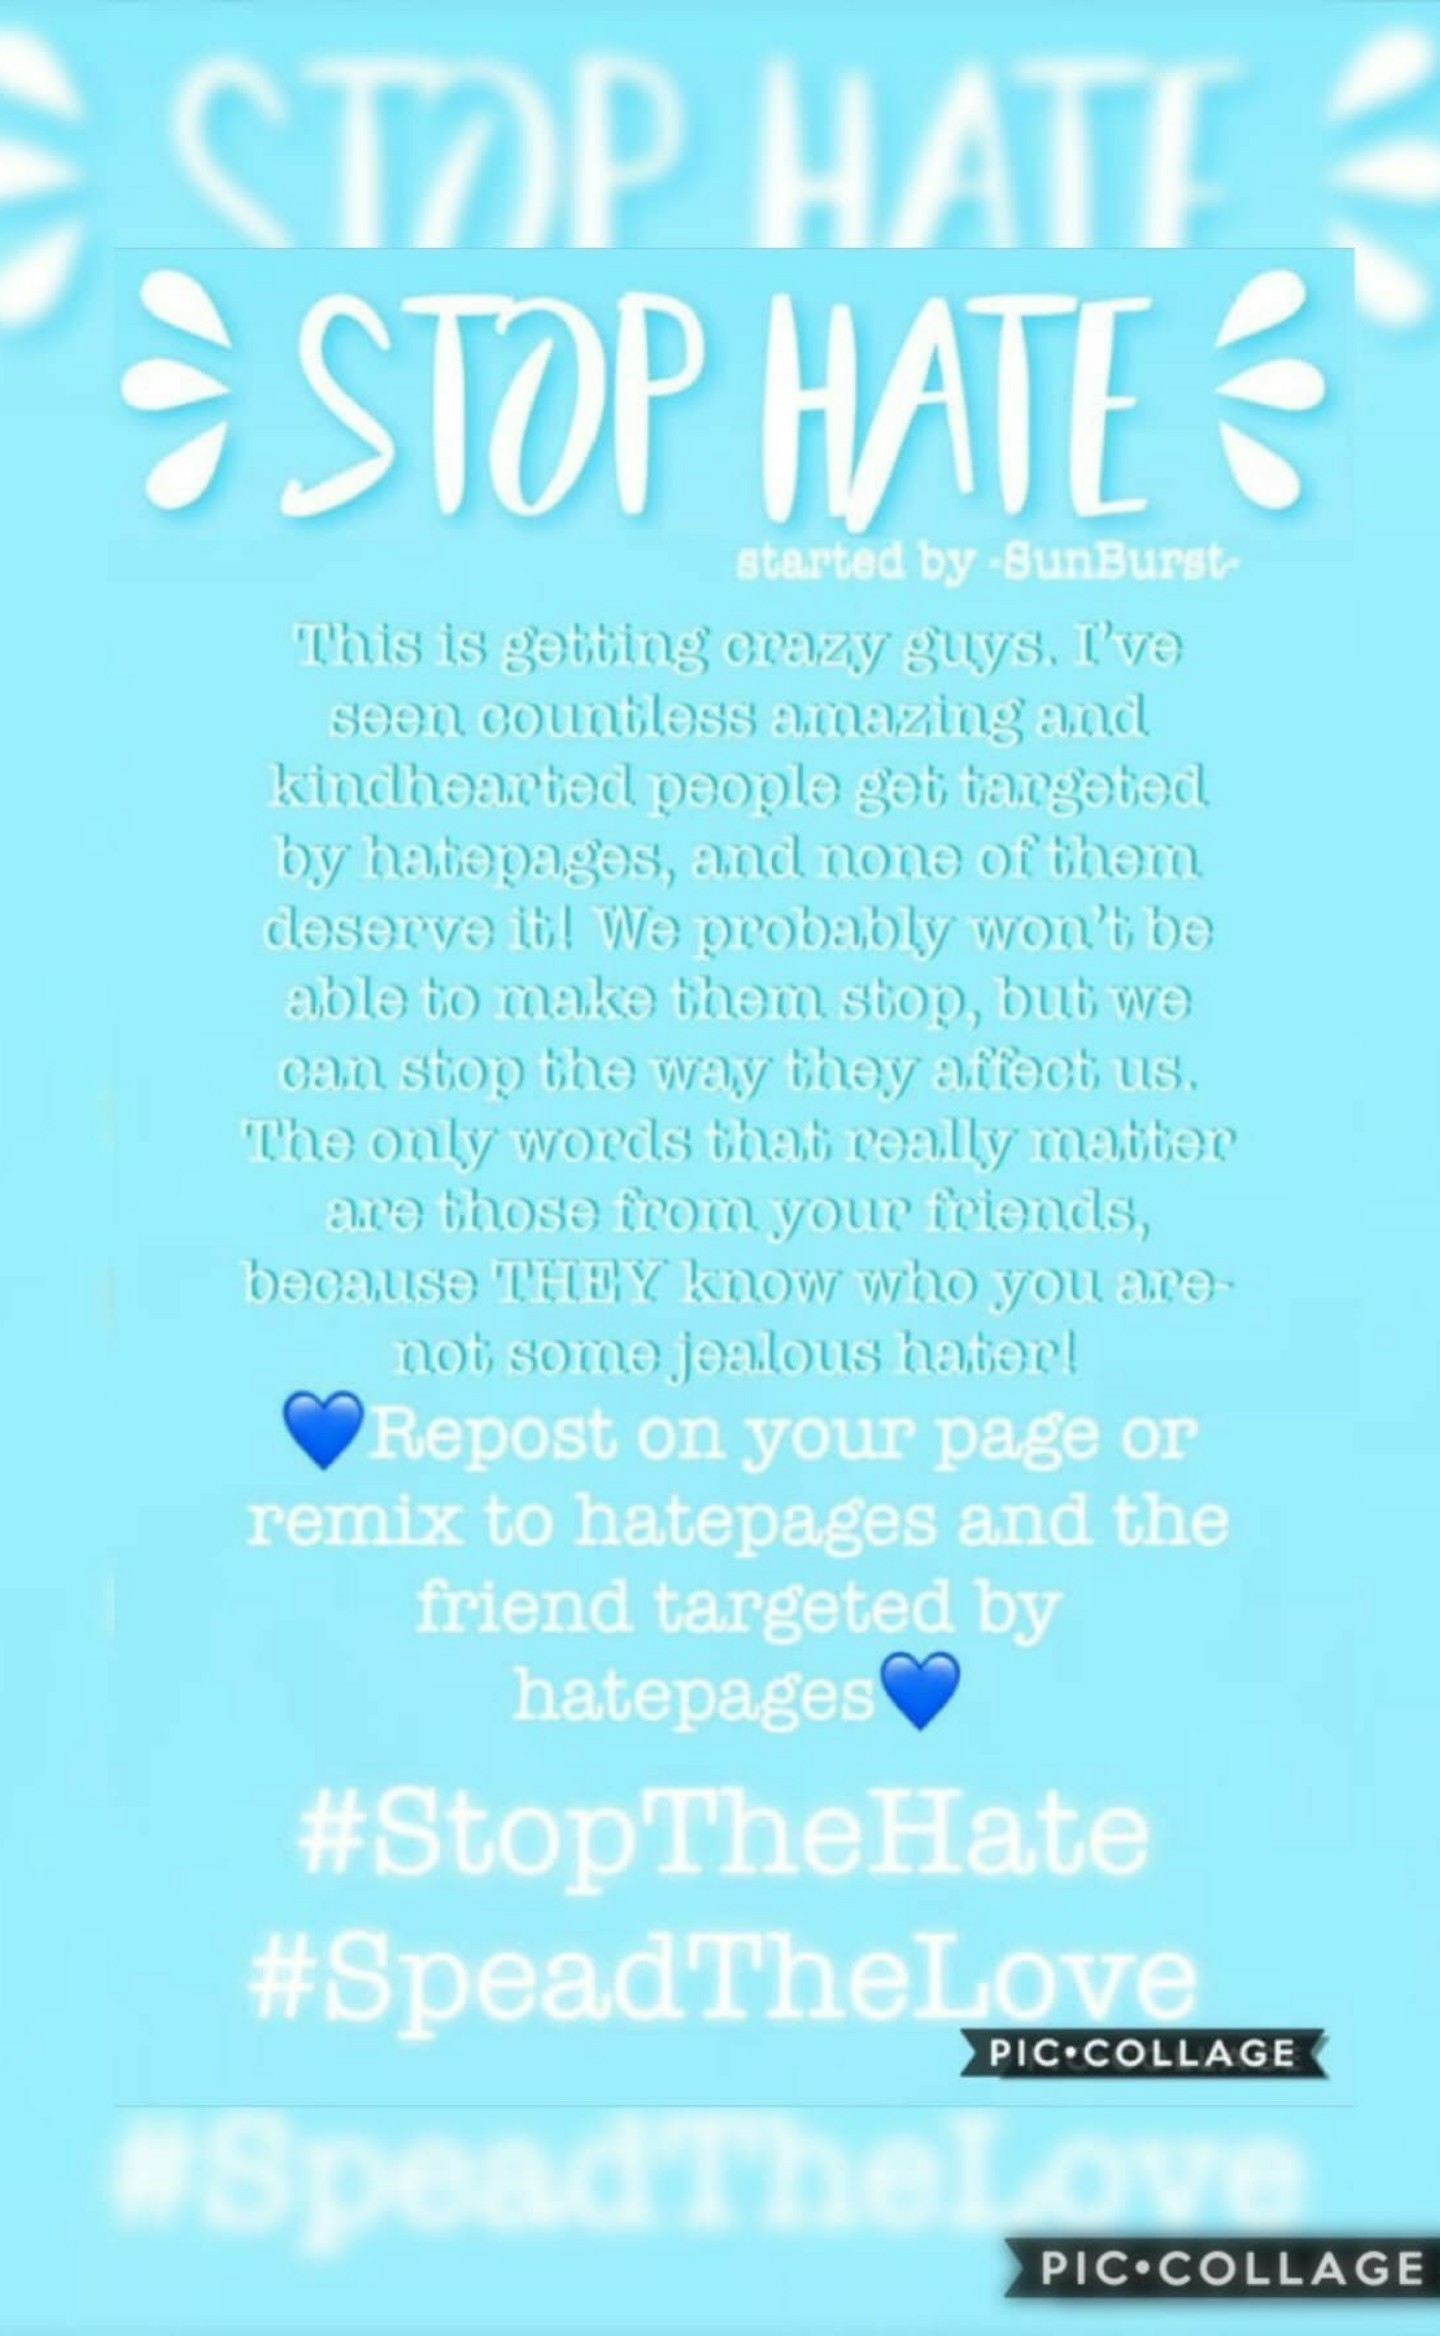 💙STOP THE HATE💙